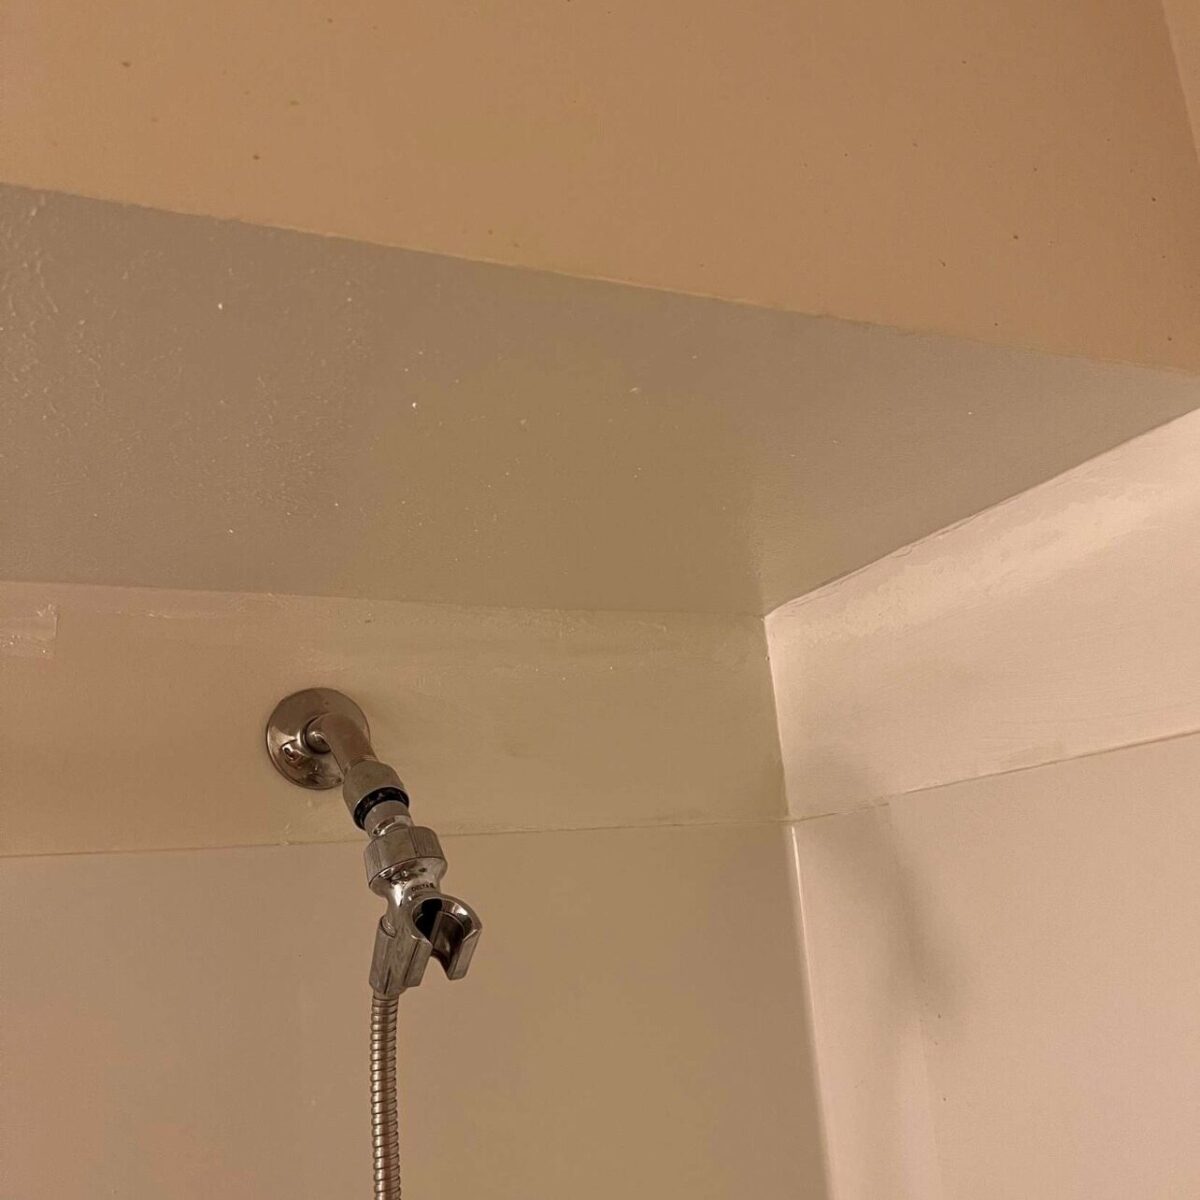 Shower After being painted